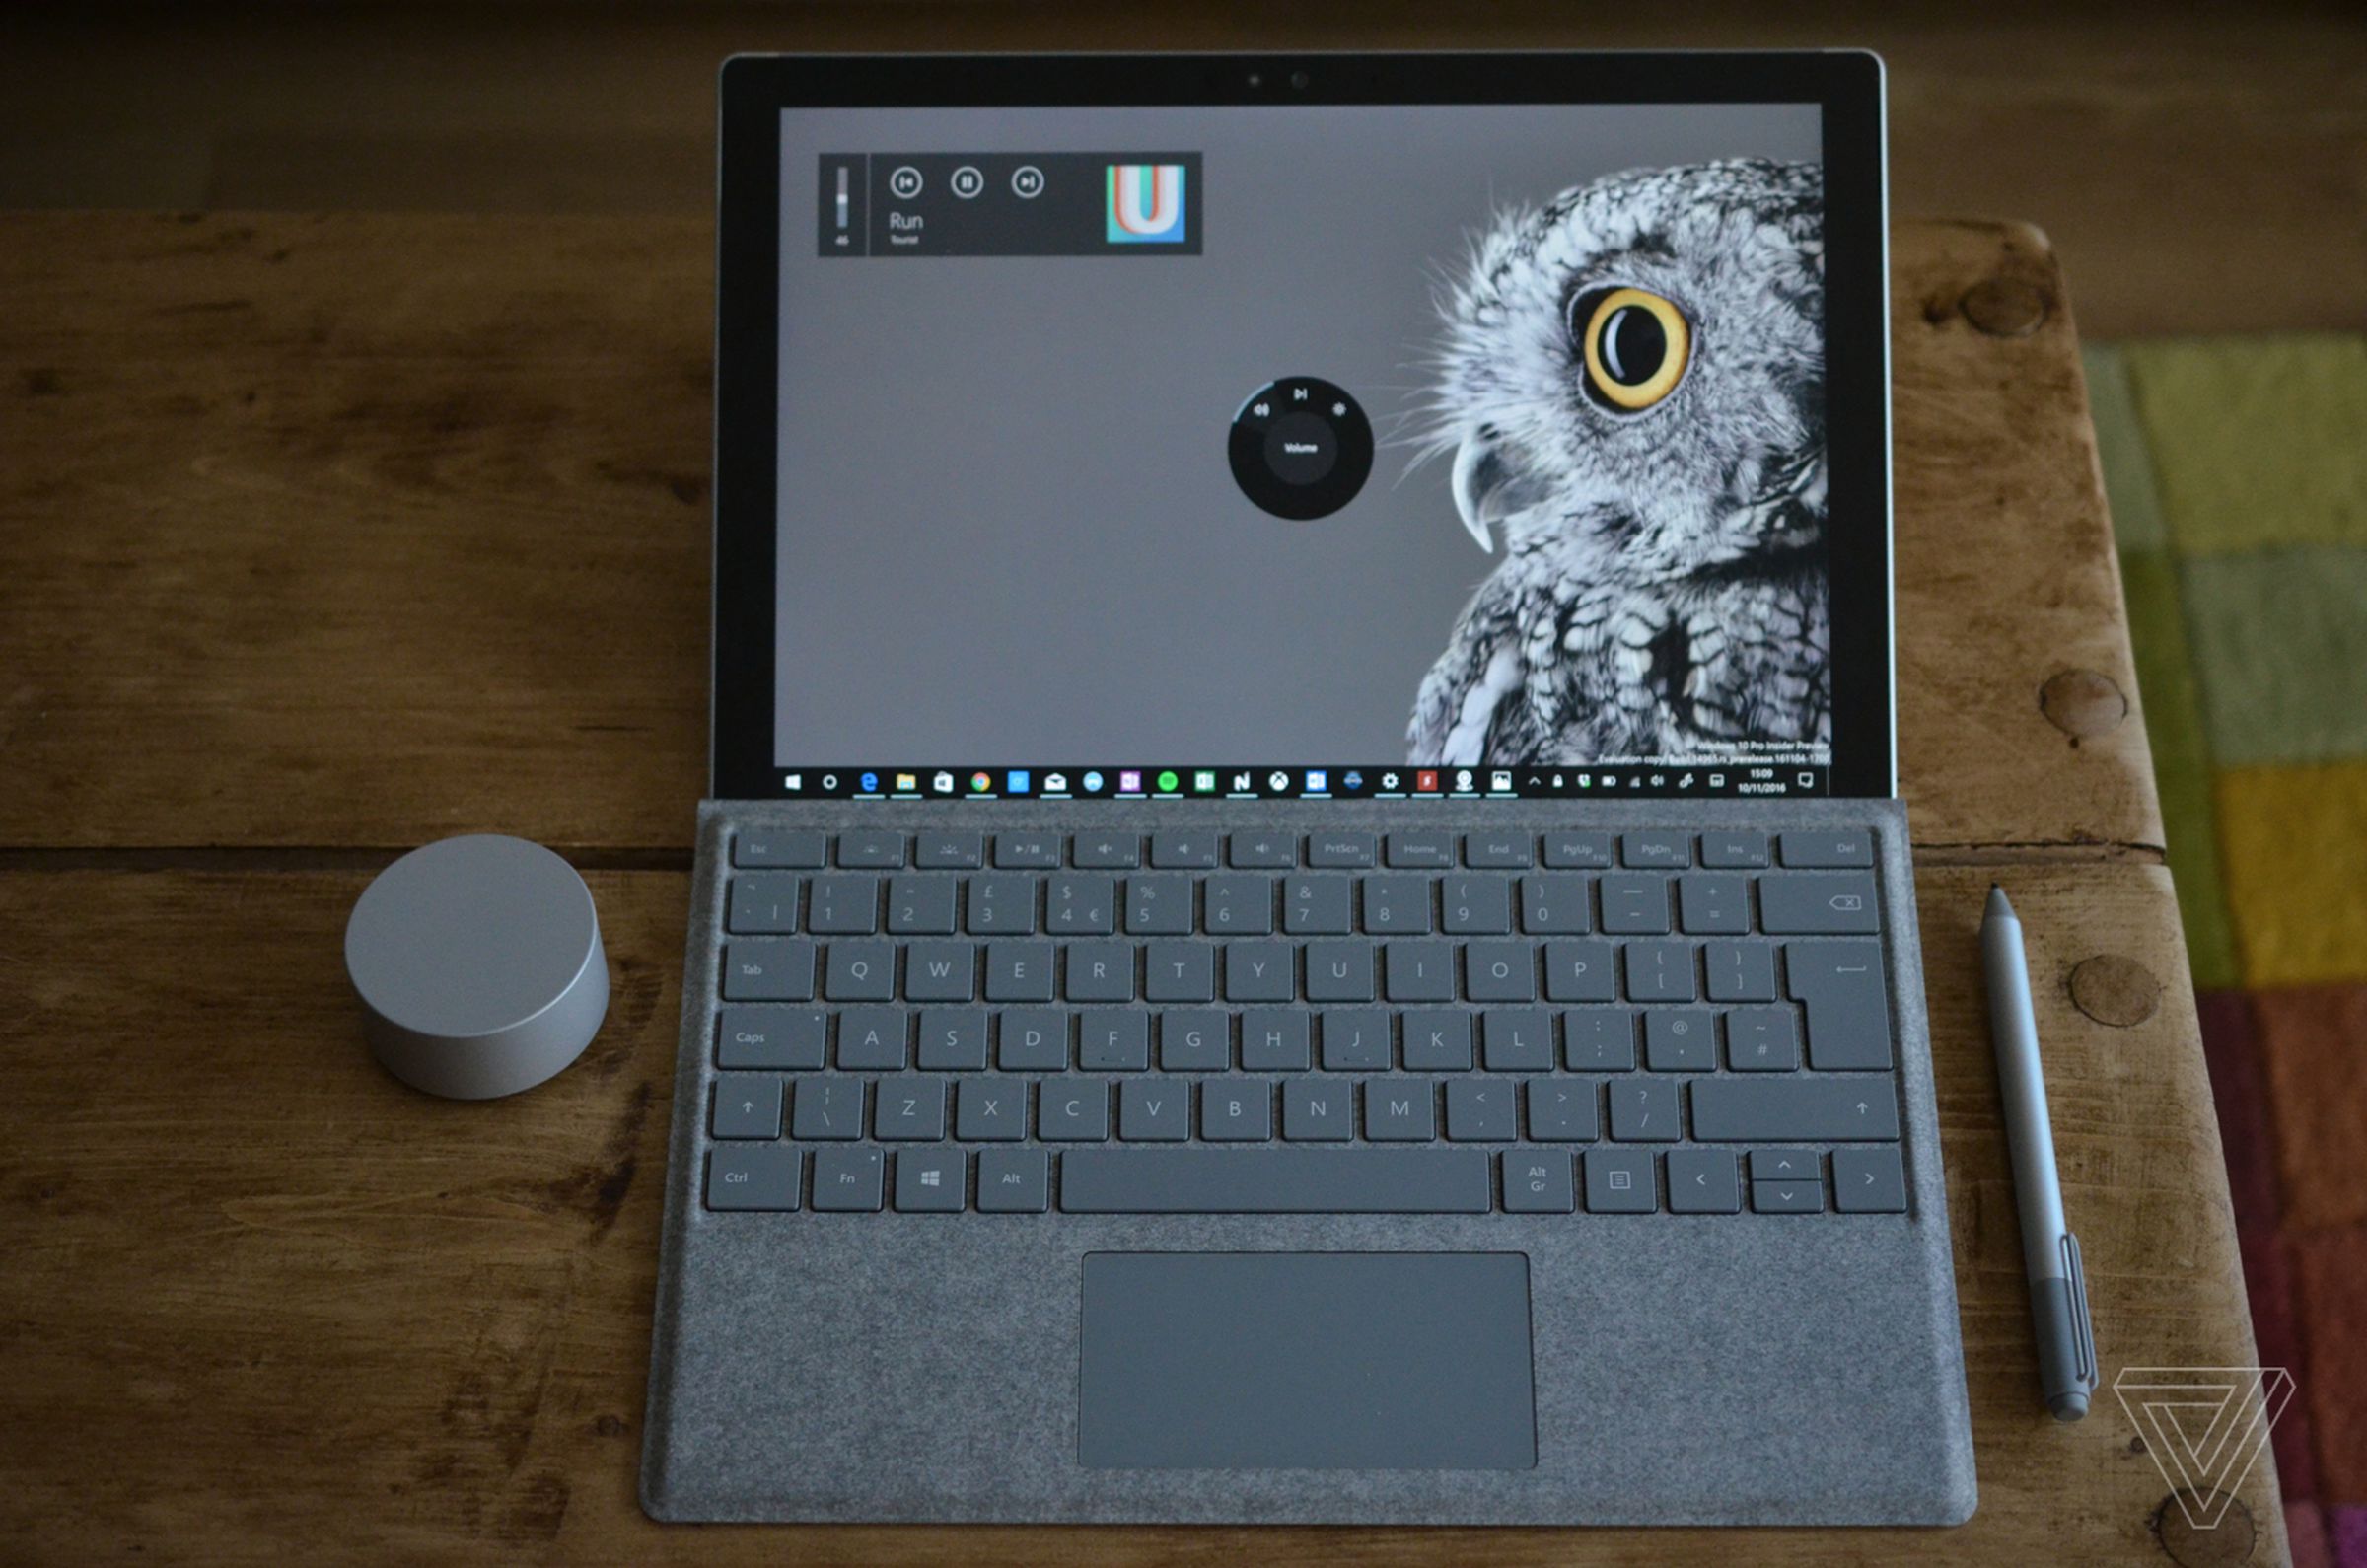 Surface Dial hands-on photos